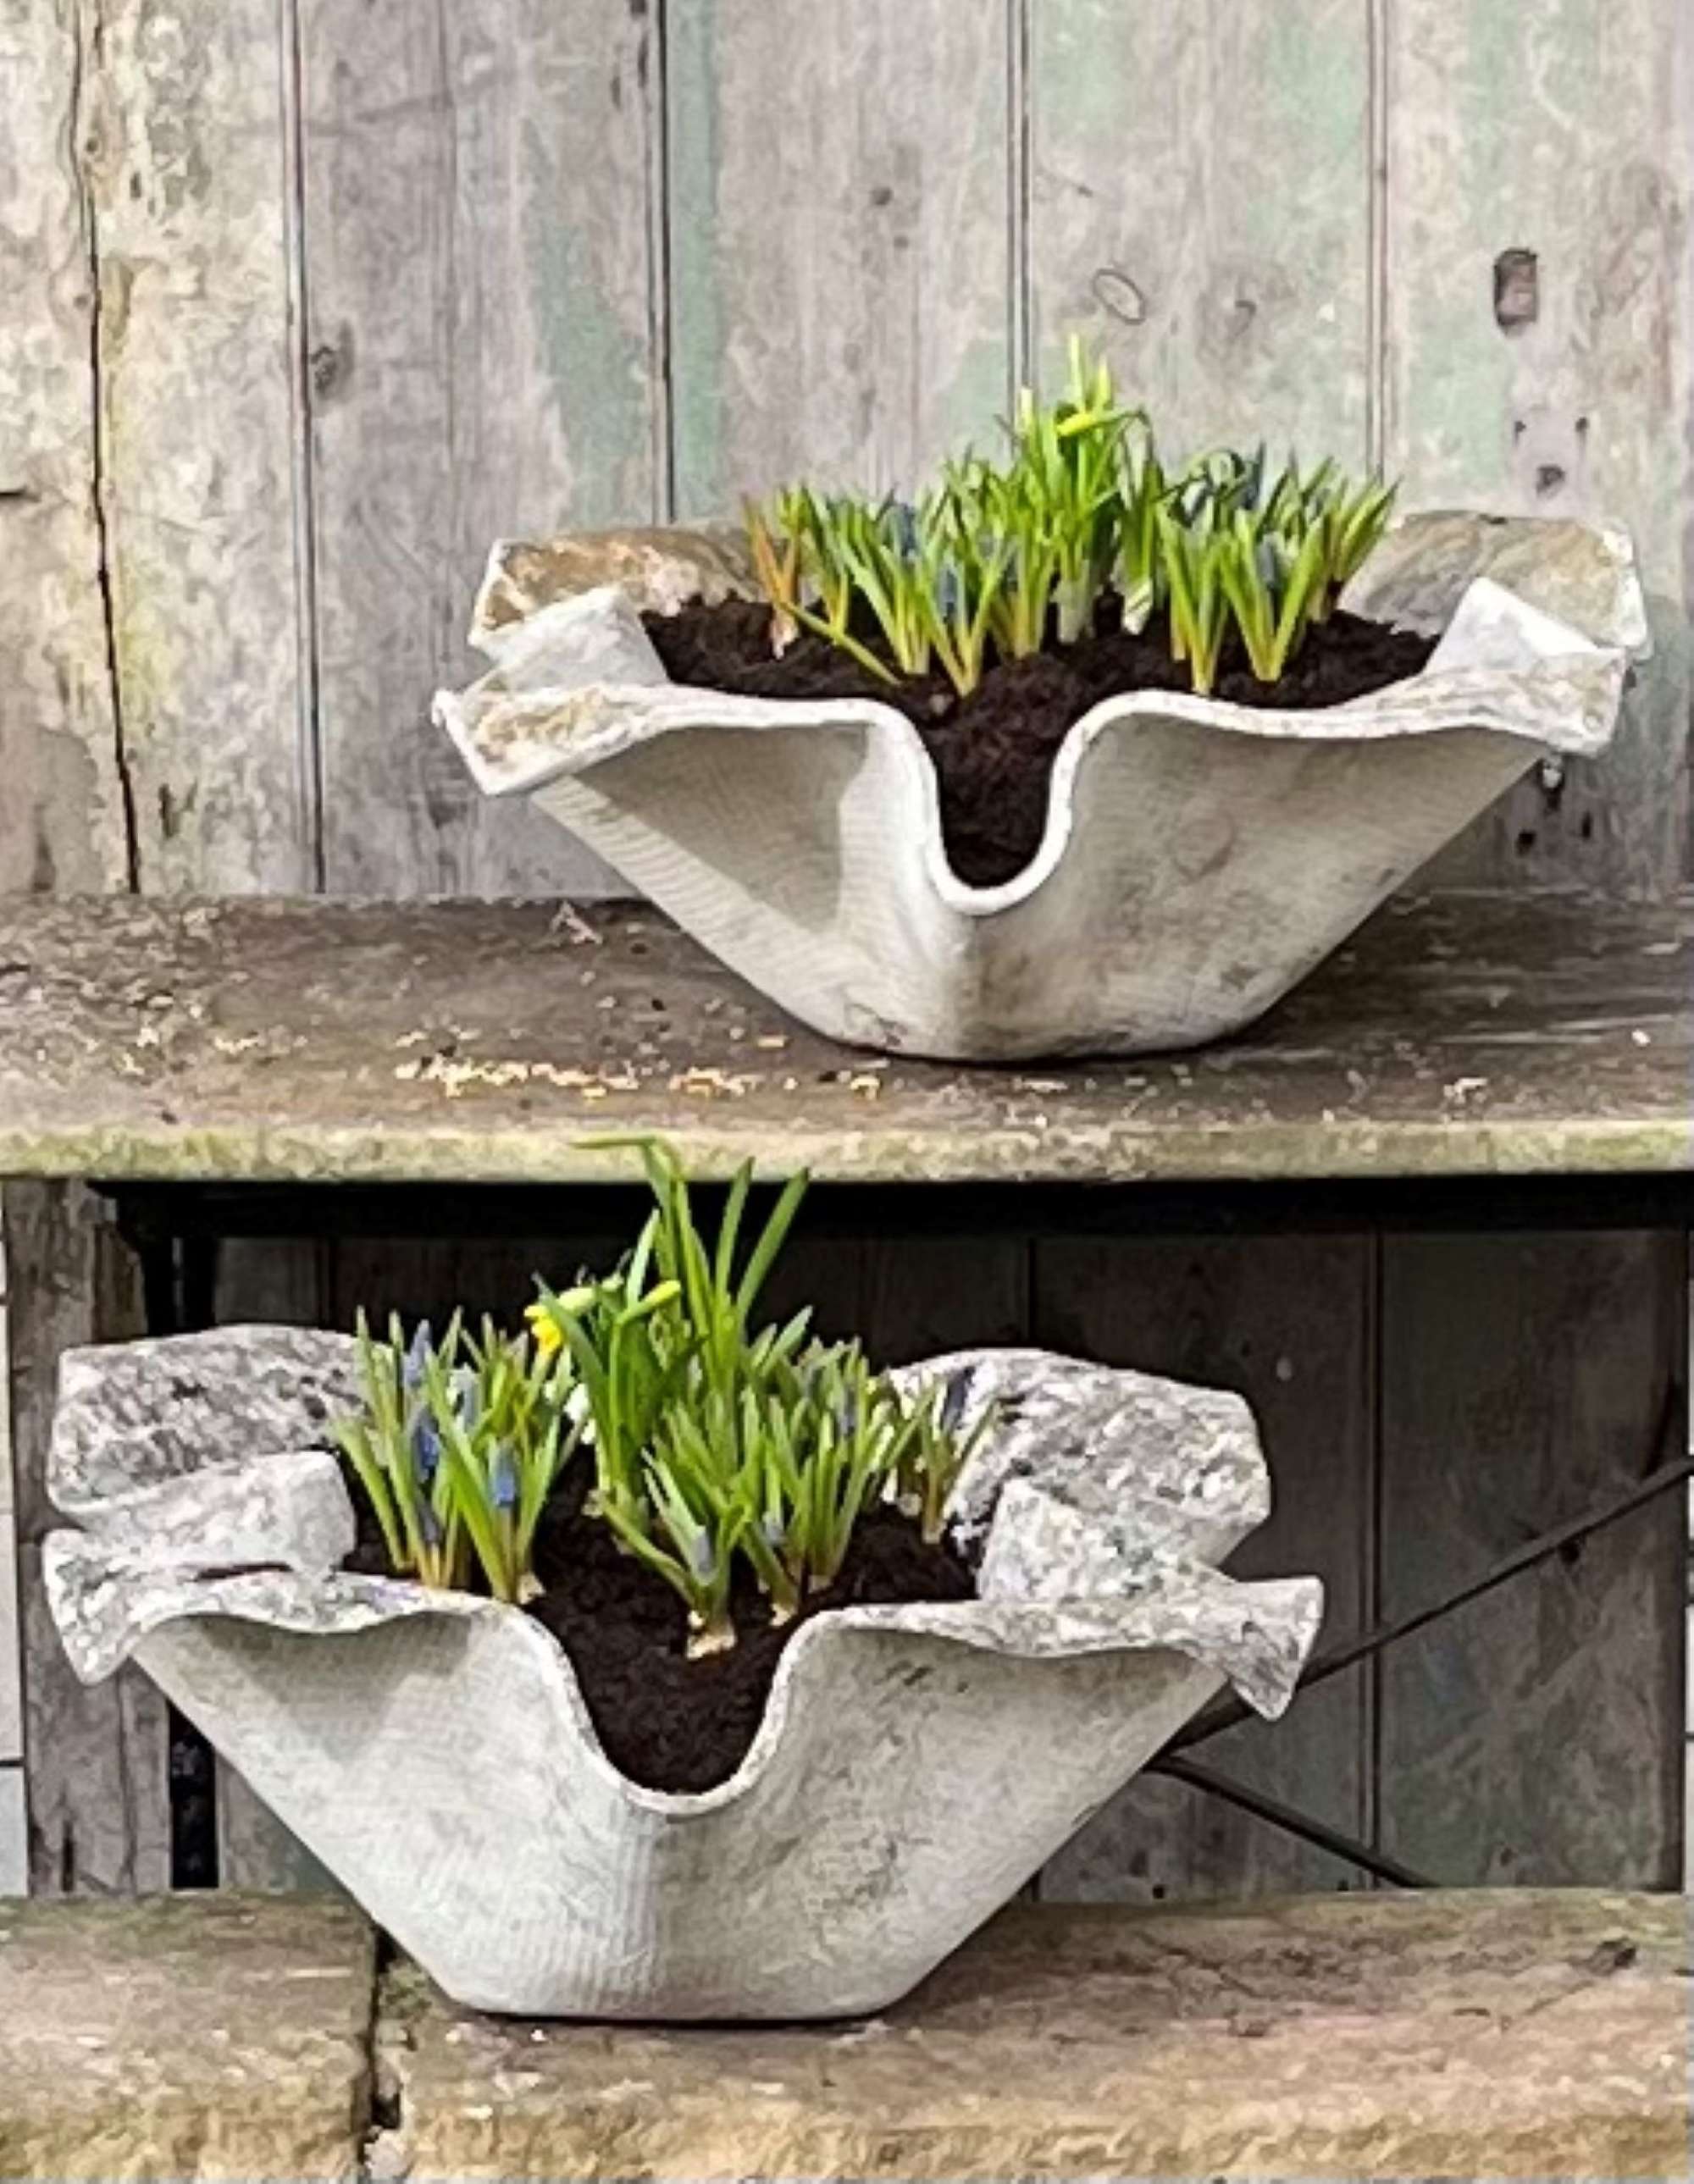 A Pair Of Sculptural Handkerchief Planters By Willy Guhl (1950s)